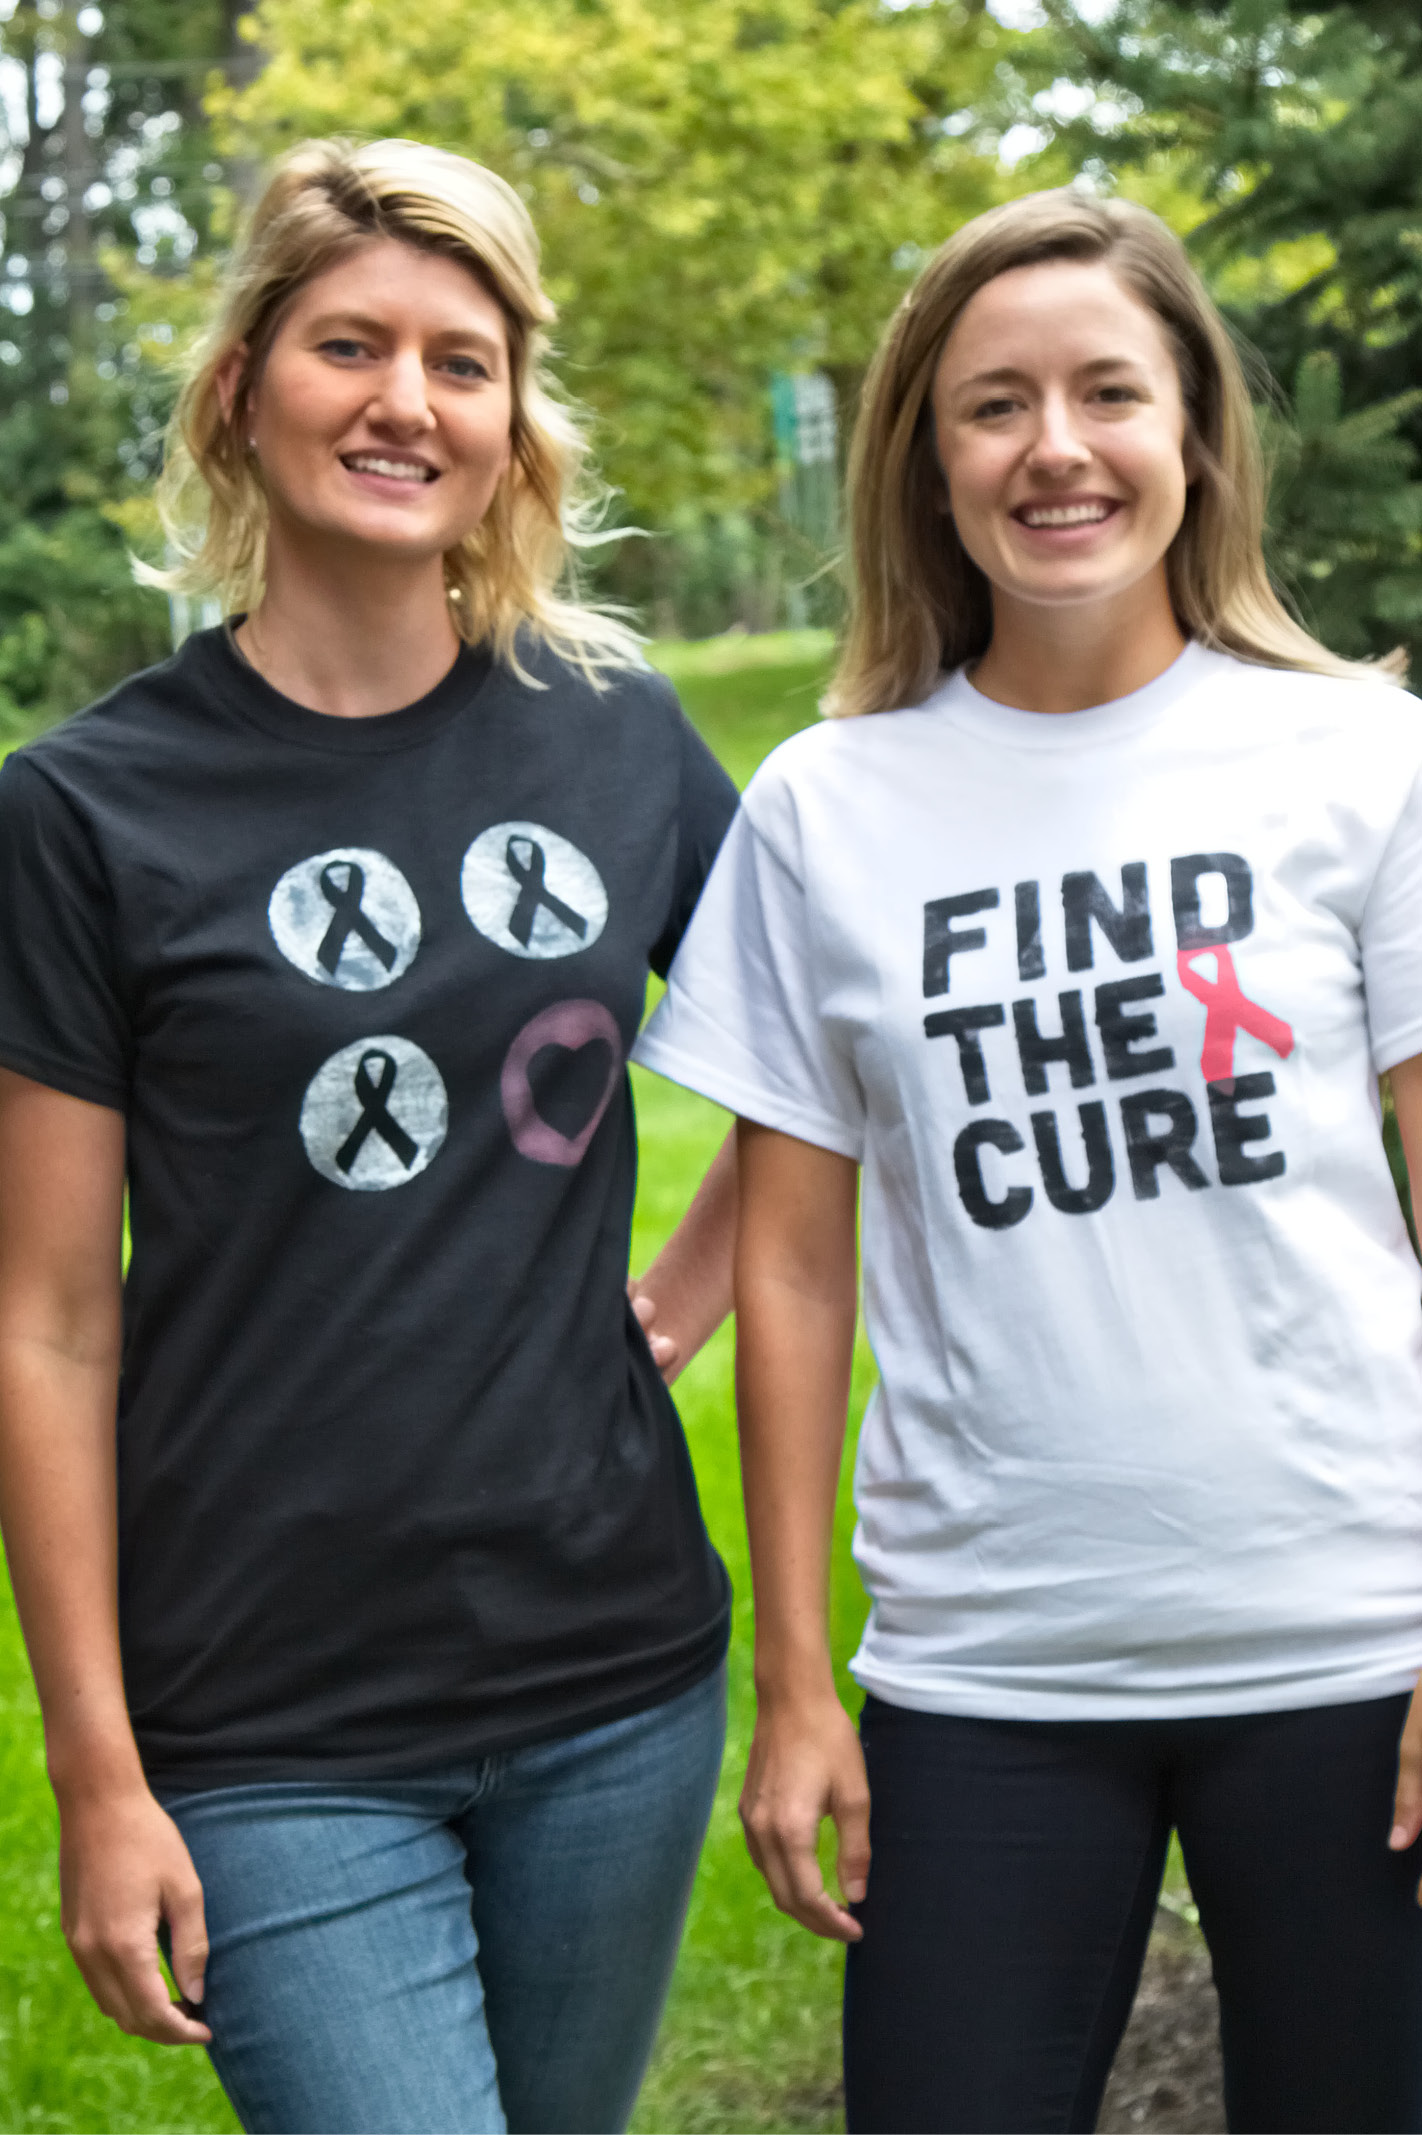 Two women posed in breast cancer awareness tees